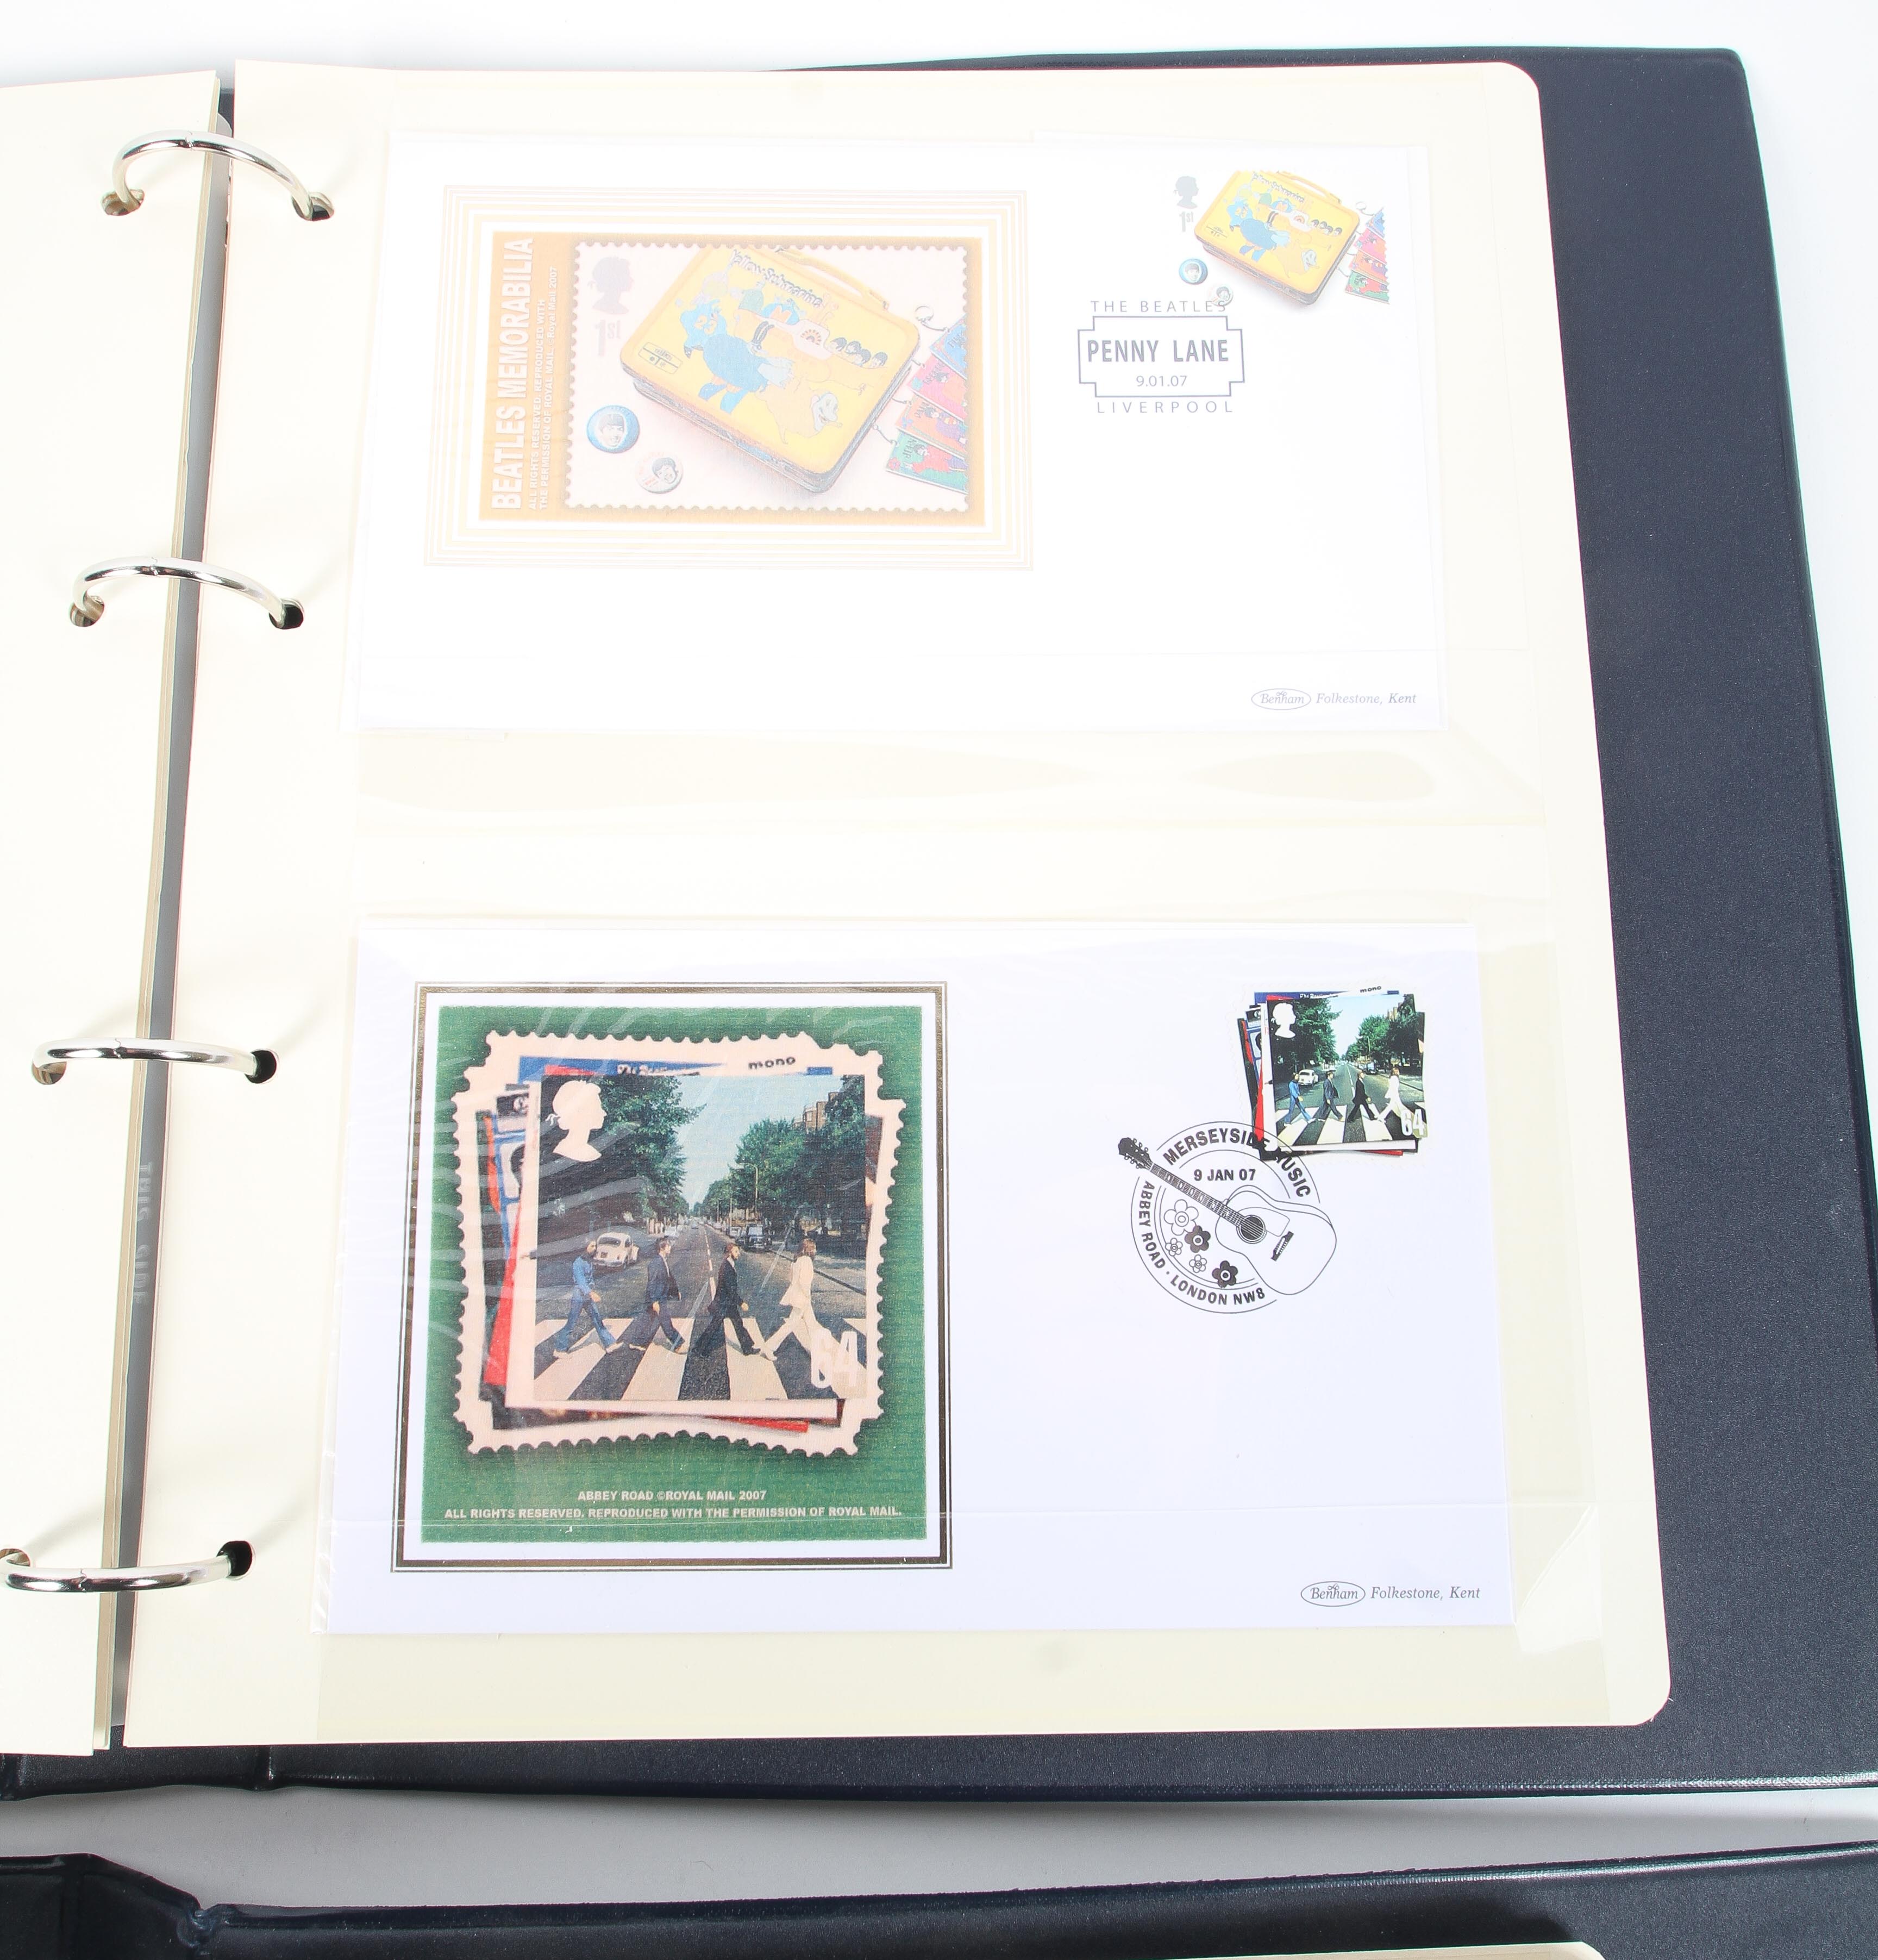 A folder containing the Spirit of the 60s Coin Cover set and a Beatles stamp cover set. - Image 2 of 3